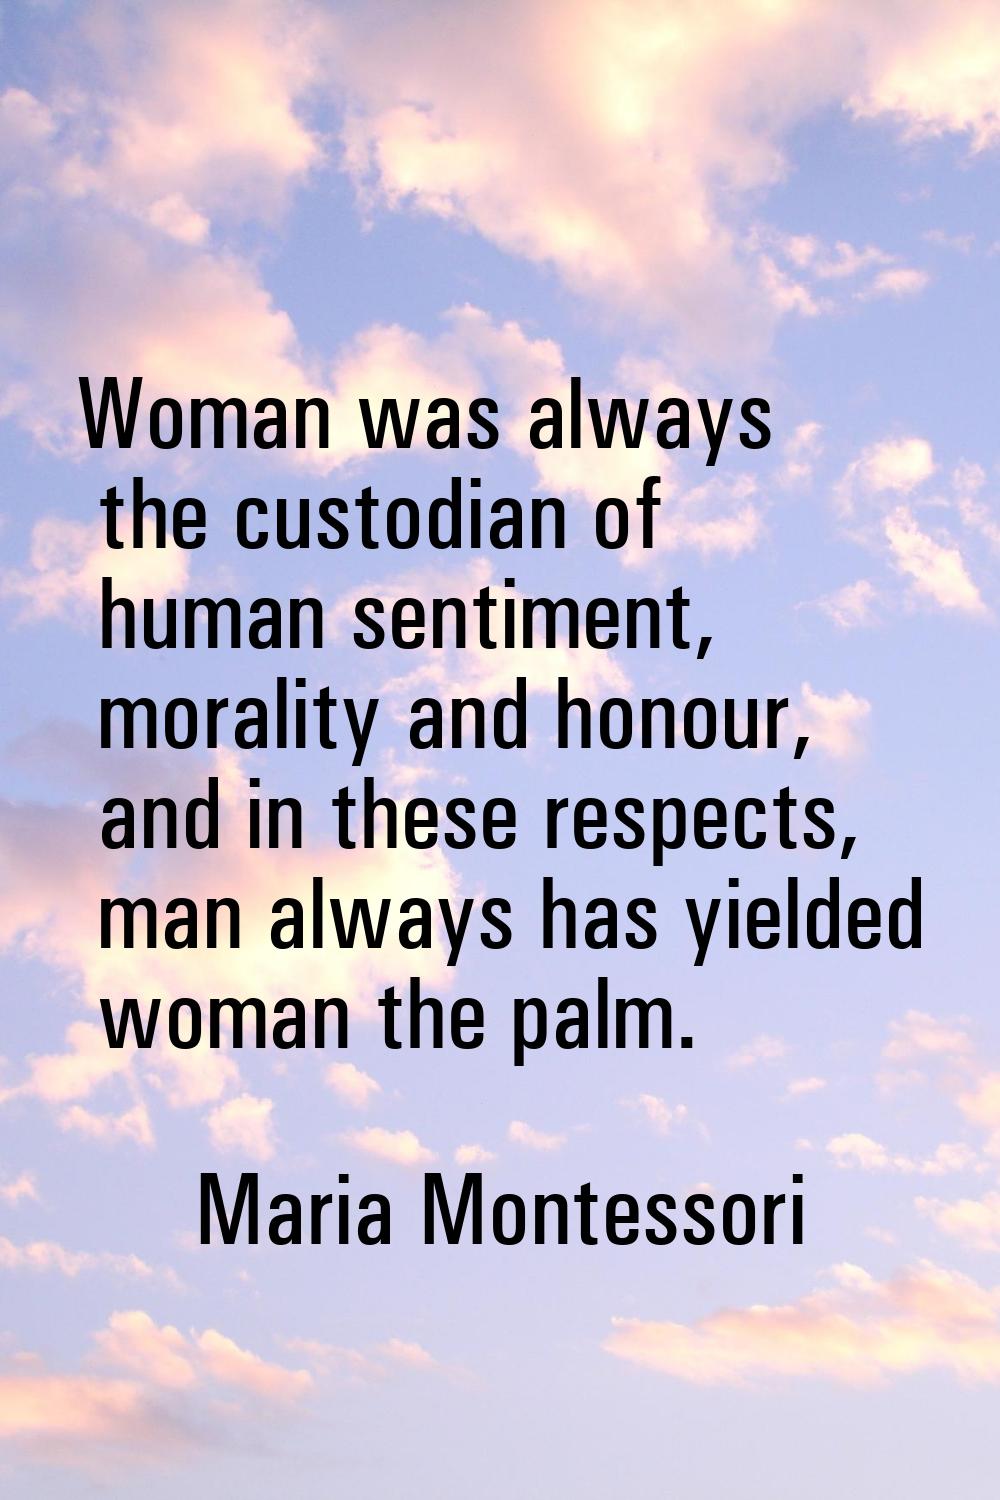 Woman was always the custodian of human sentiment, morality and honour, and in these respects, man 